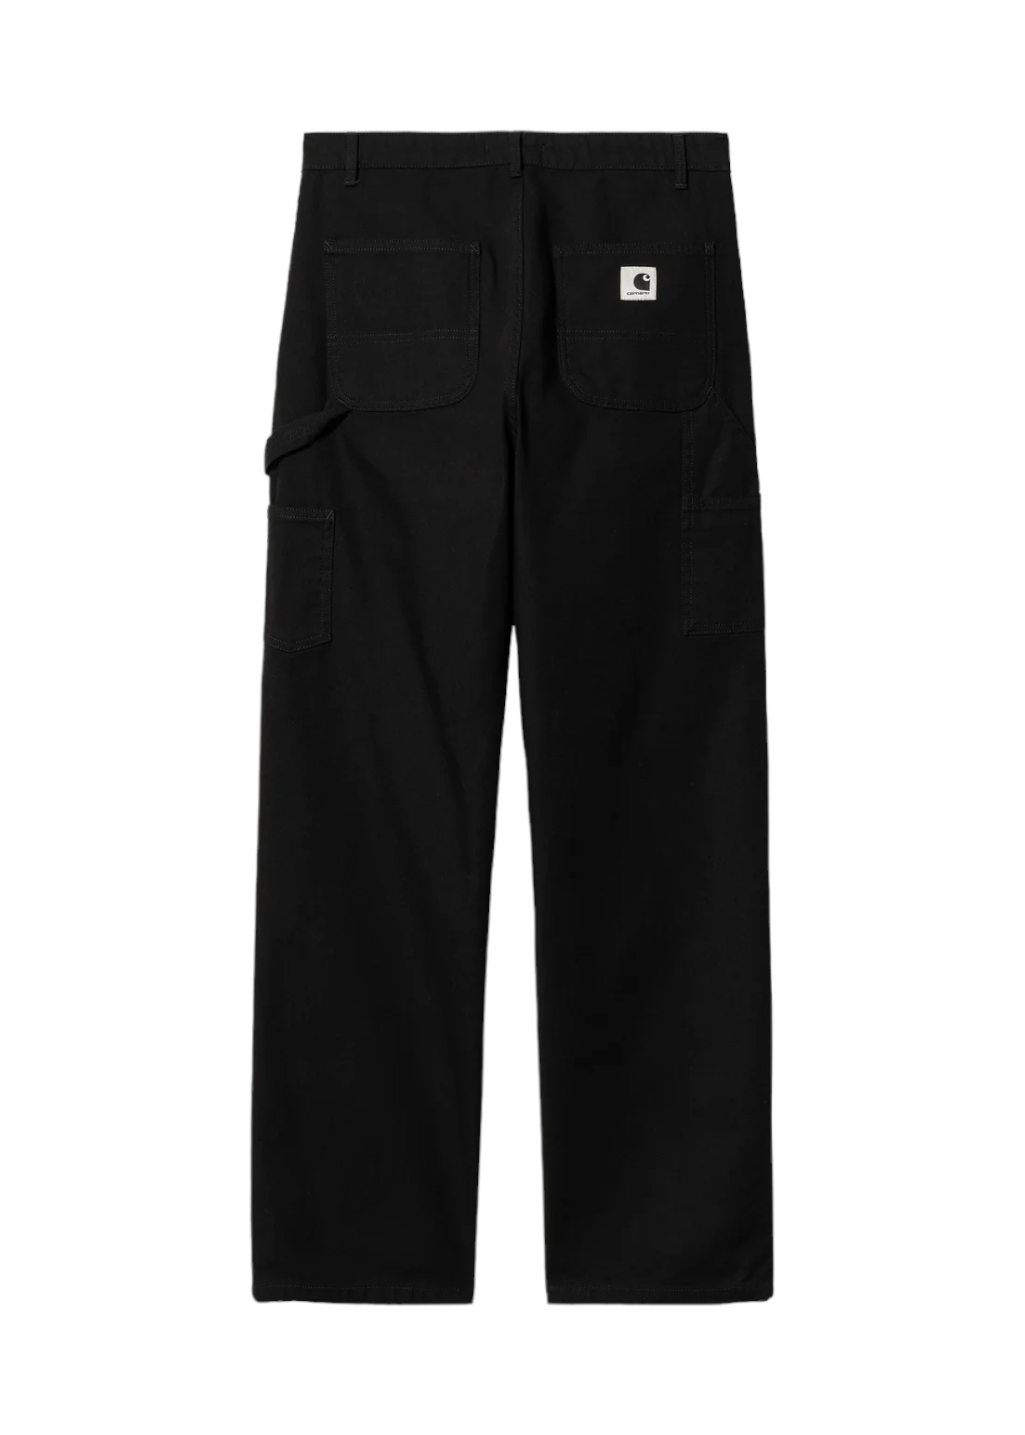 Carhartt Women's Skinny Fit Black Knit (Large) in the Pants department at